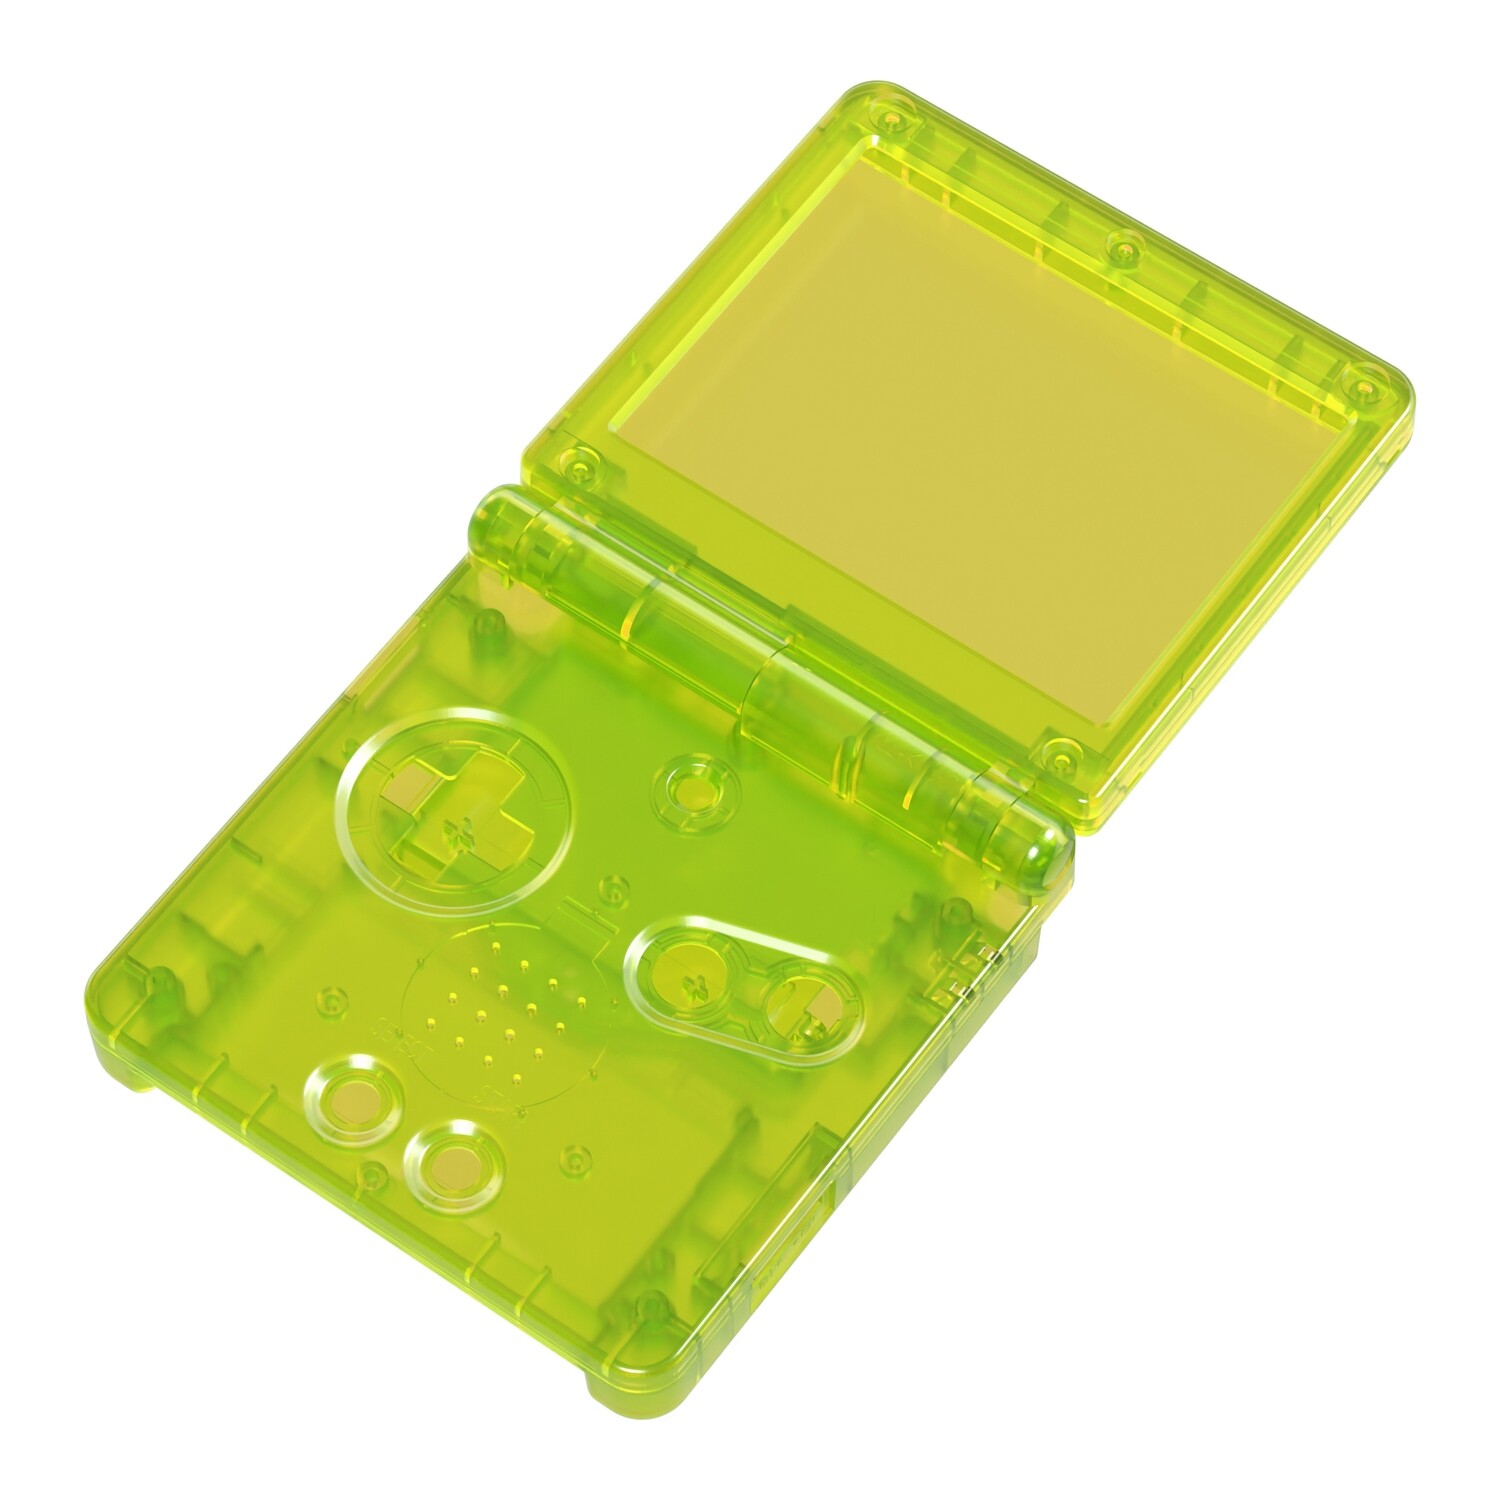 Game Boy Advance SP Shell (Clear Yellow)